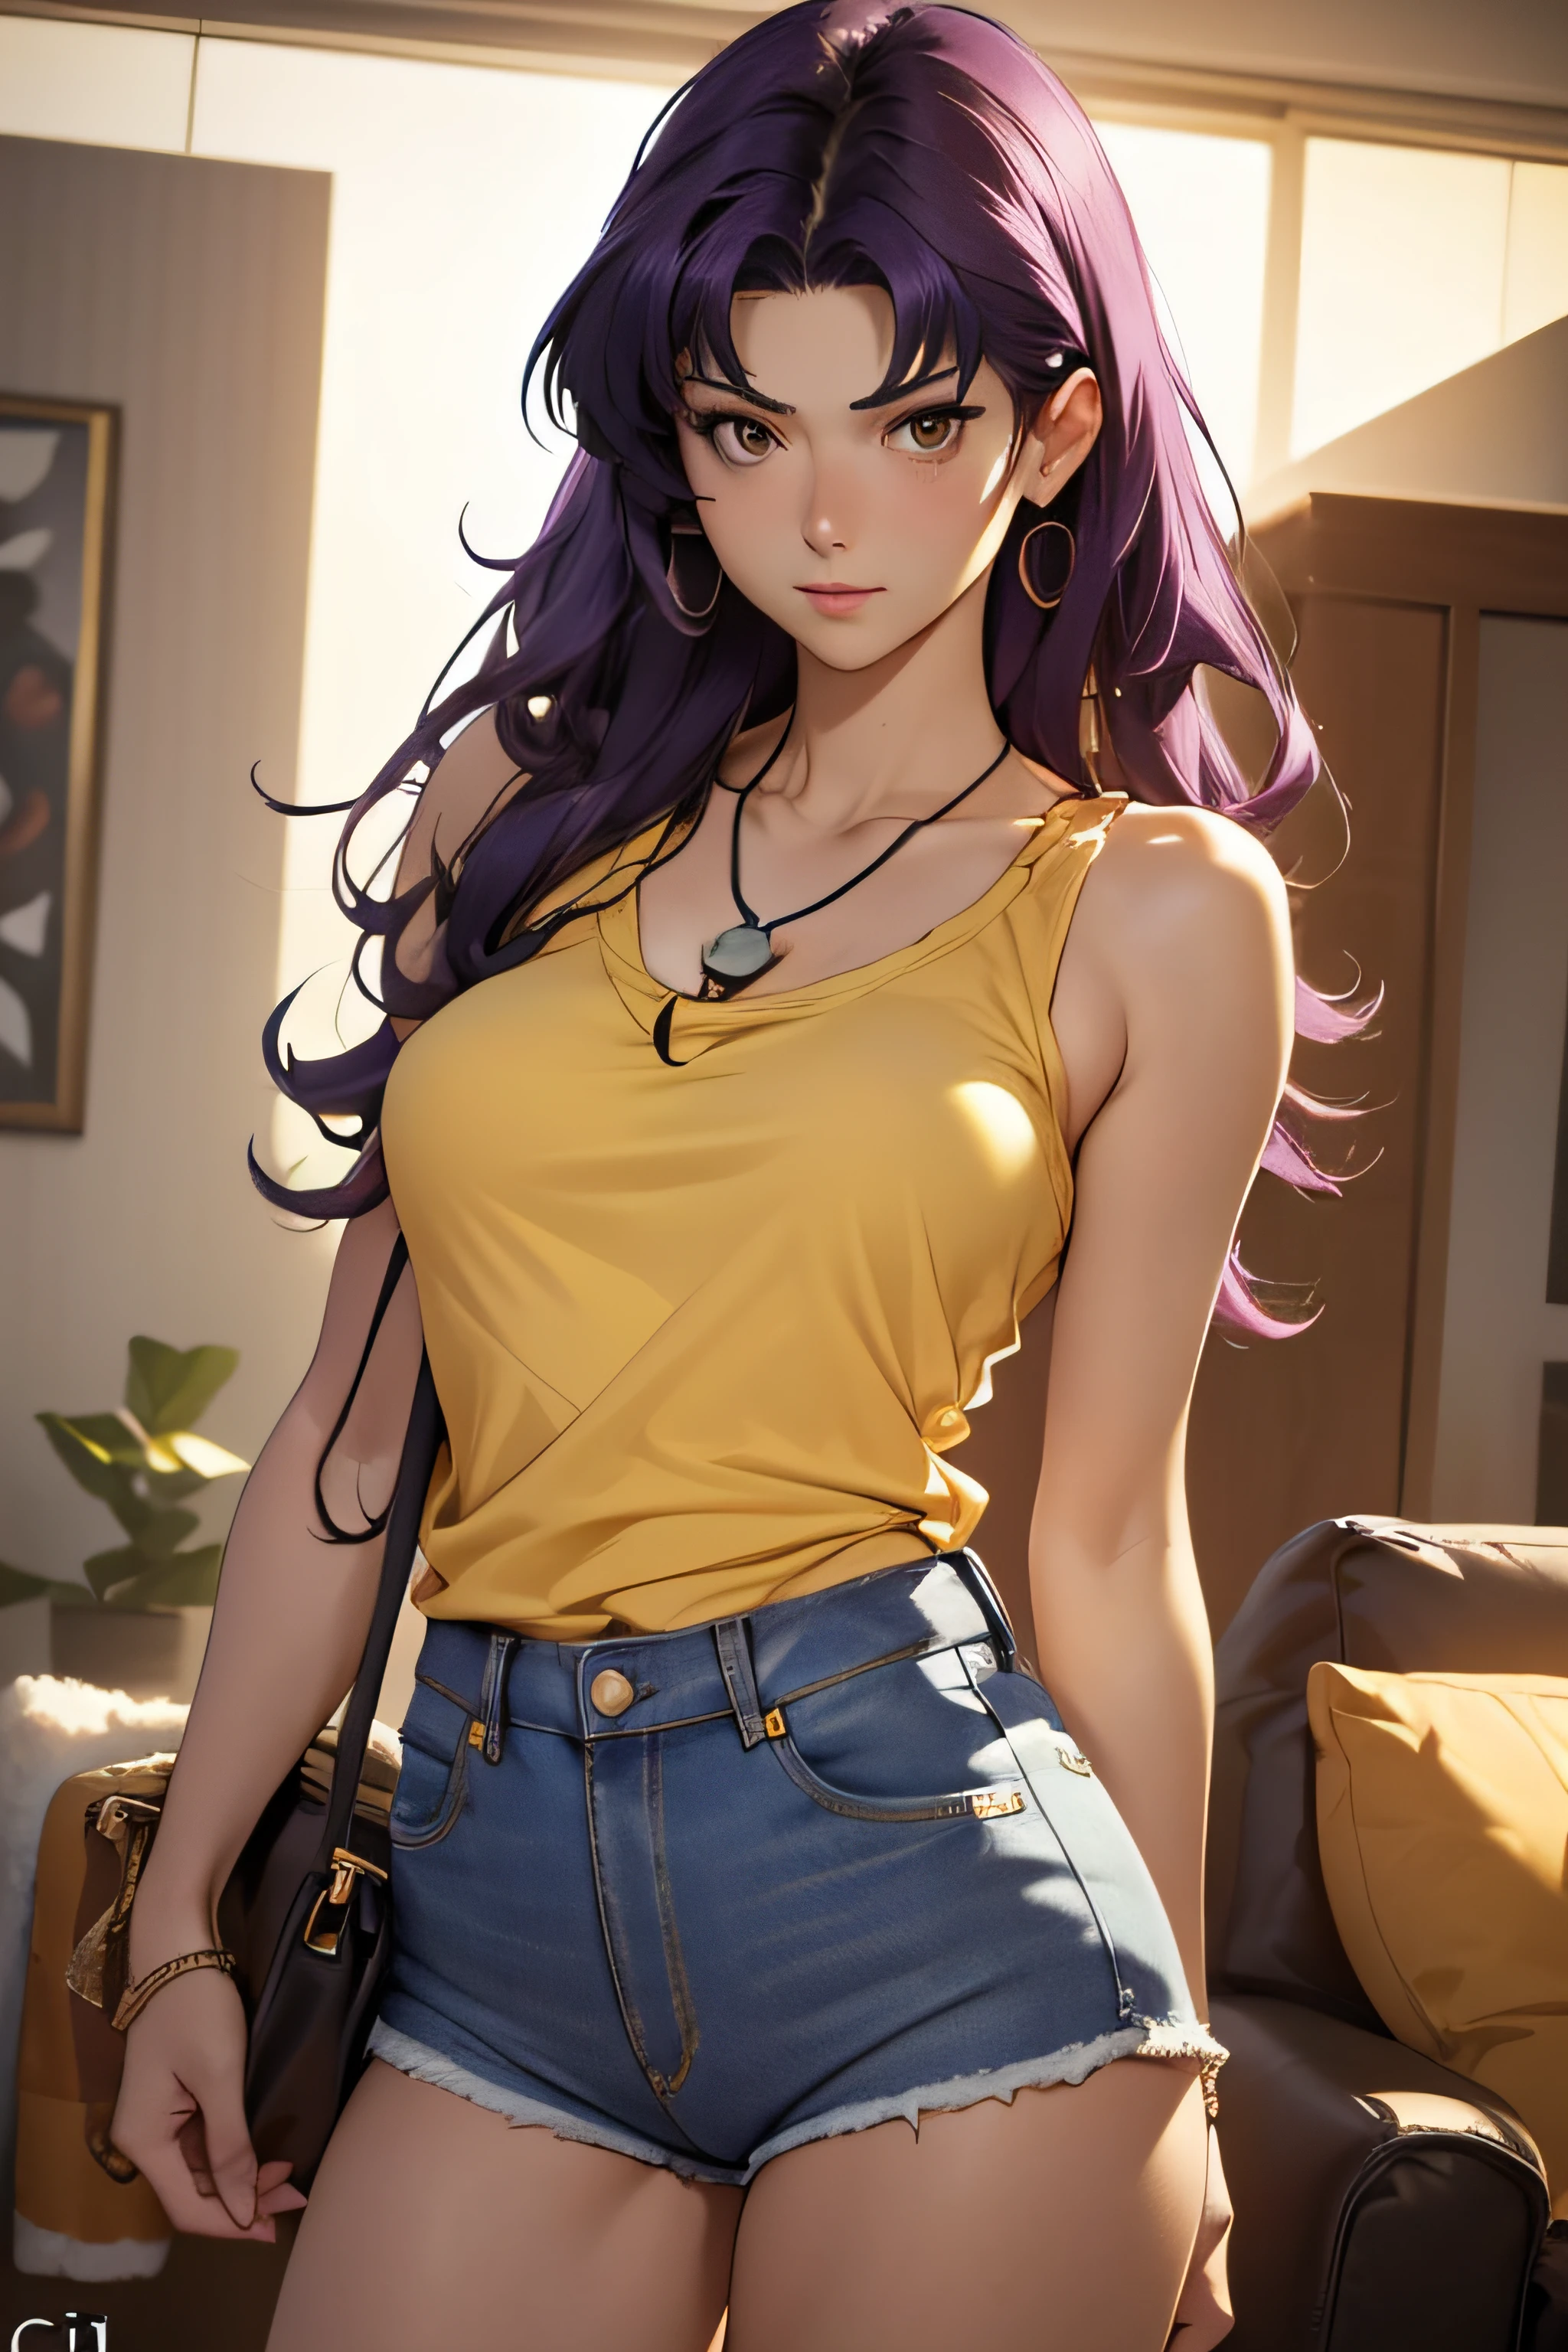 1woman, attire: tank top, (((yellow top))), (((jeans shorts))), black eyes, purple hair, medium hair, make up, necklace, tall, slim body, MisatoKatsuragi (NGE), (((MisatoKatsuragi))), indoors, living room, (((front view))), looking at viewer, nice thighs, perfectly detailed face, perfectly detailed hands and fingers, masterpiece 1.1, trending on artstation, pixiv quality, (((art by cjin))), intricately detailed, ultra graphics, sfw version, (((milf 1.1))),